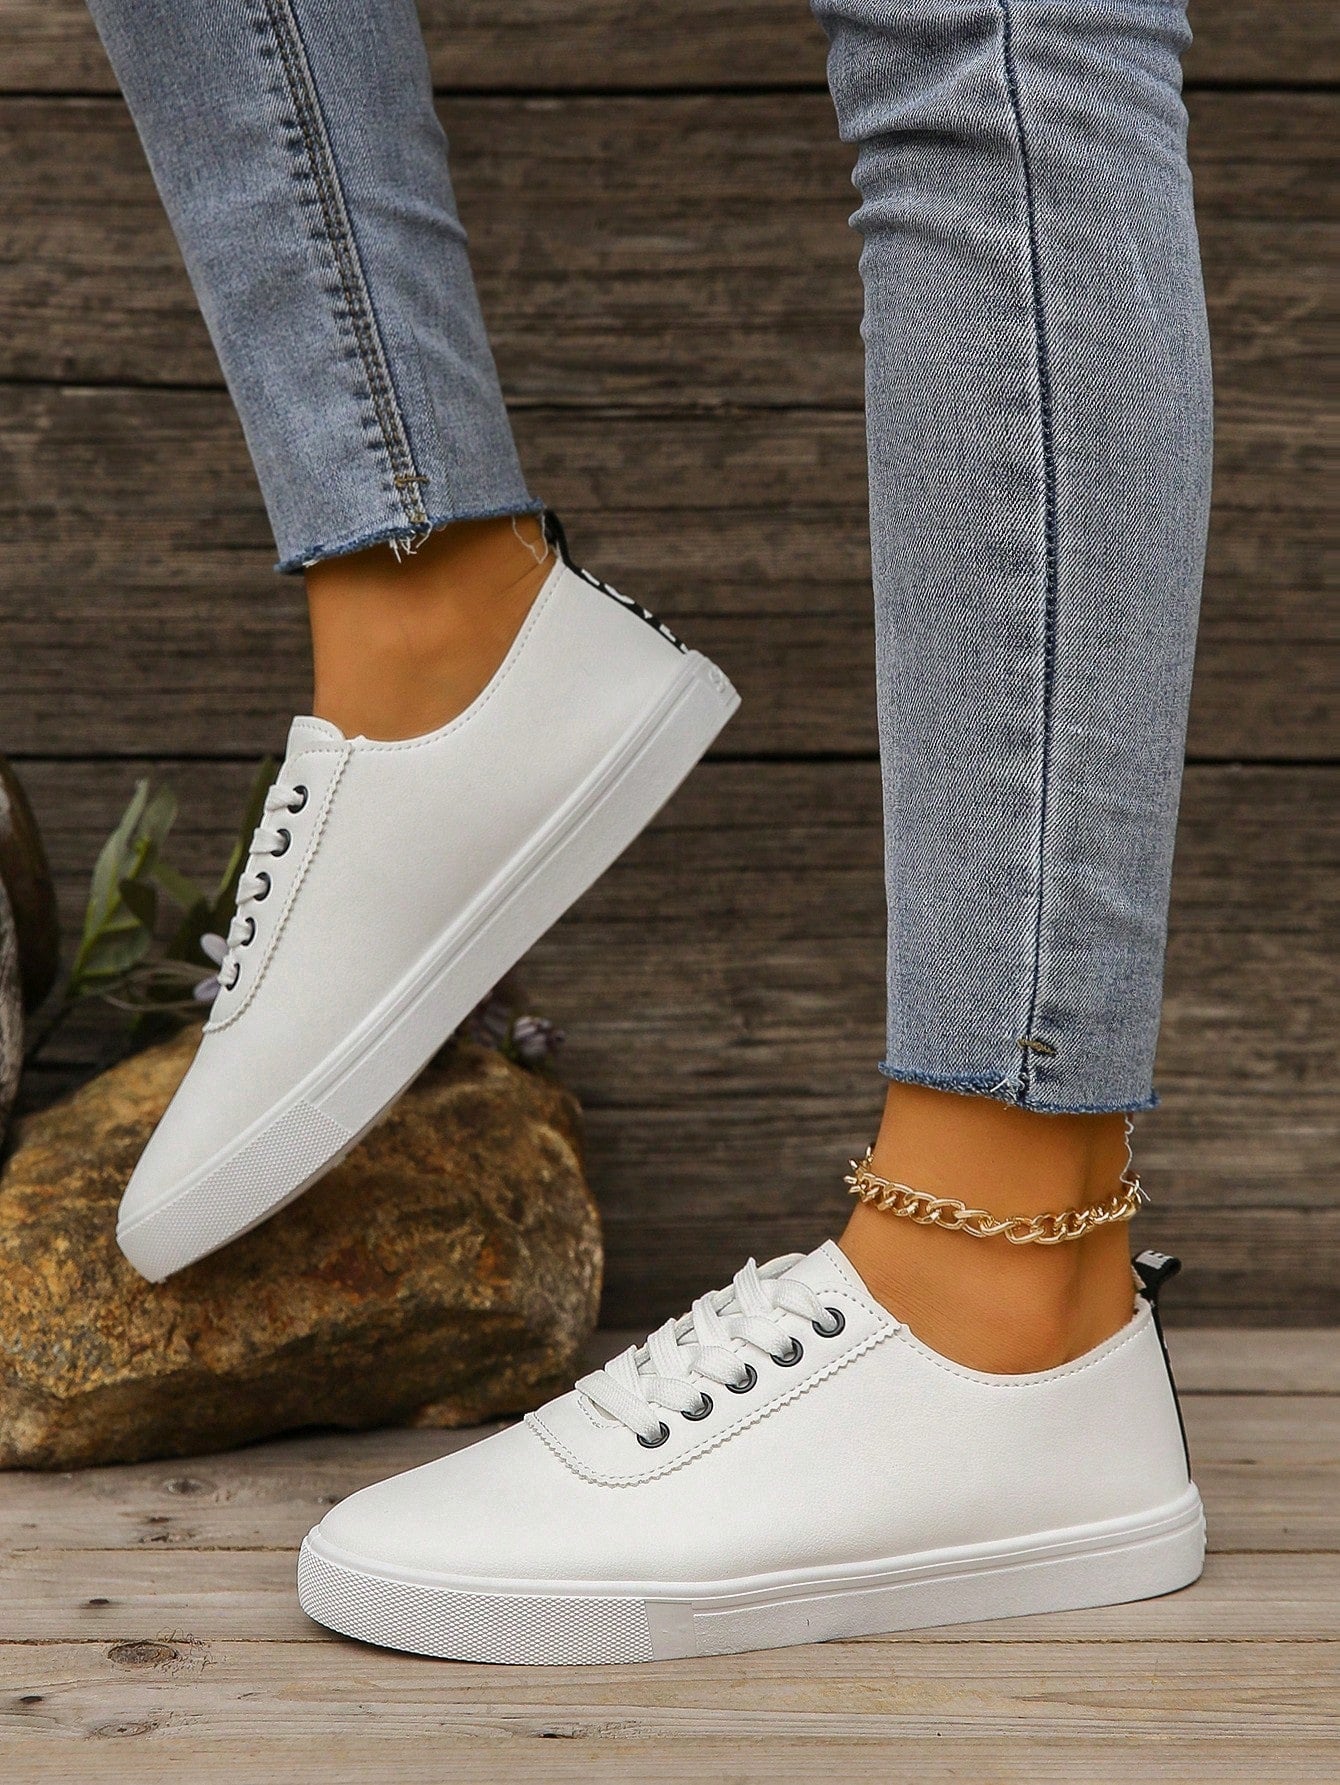 Women's Chunky Sneakers Thick-soled Platform Running Shoes